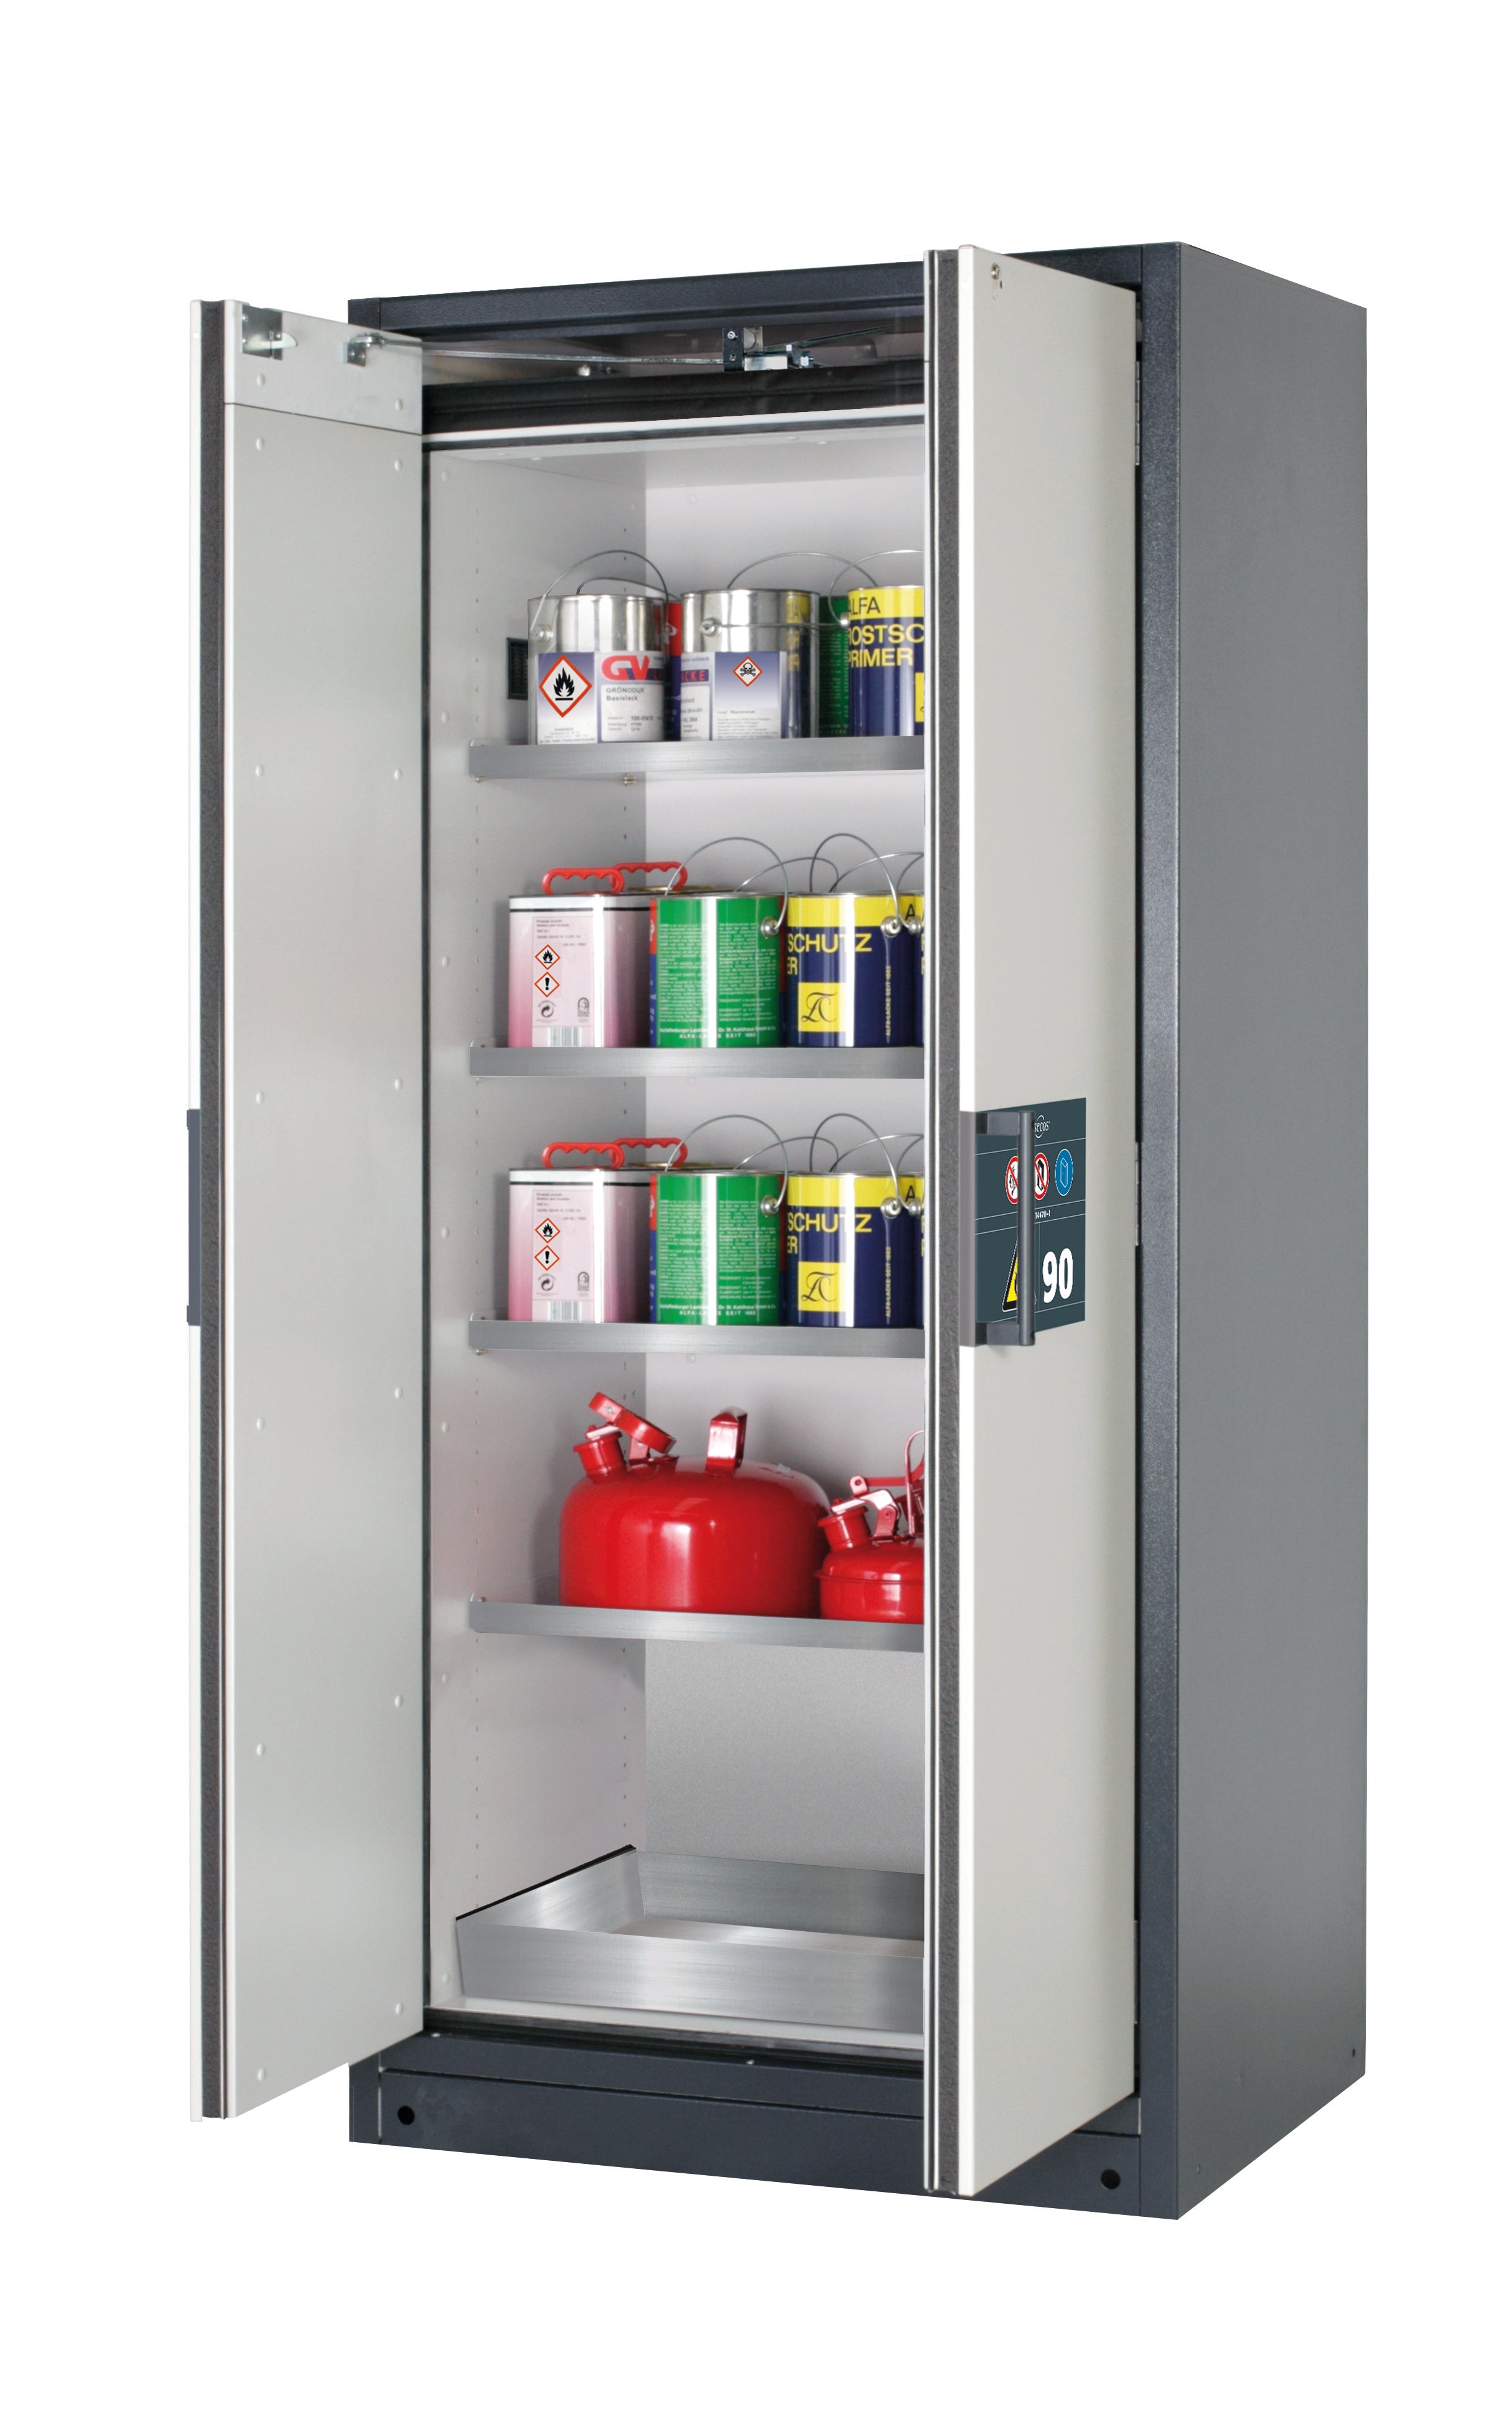 Type 90 safety storage cabinet Q-PEGASUS-90 model Q90.195.090.WDAC in light grey RAL 7035 with 4x shelf standard (stainless steel 1.4301),